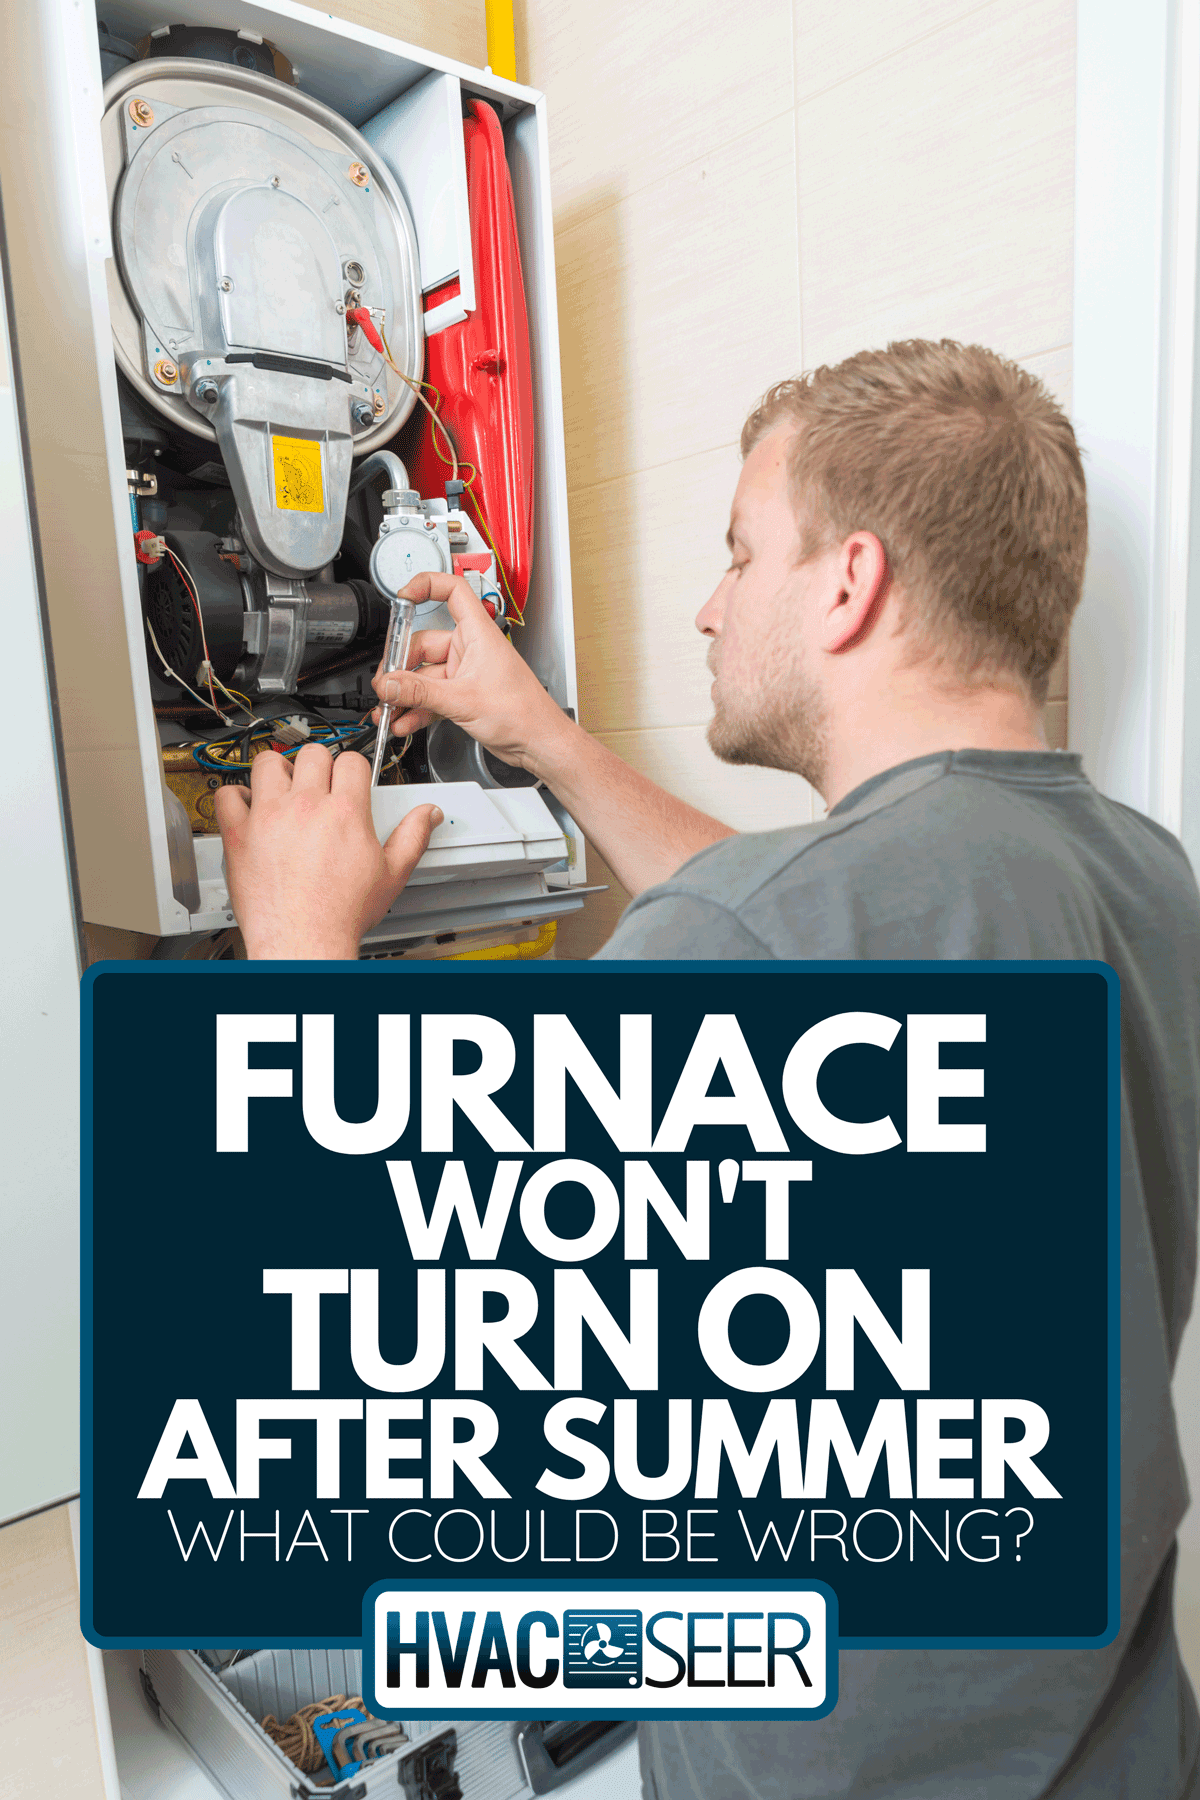 A technician repairing furnace, Furnace Won't Turn On After Summer - What Could Be Wrong?